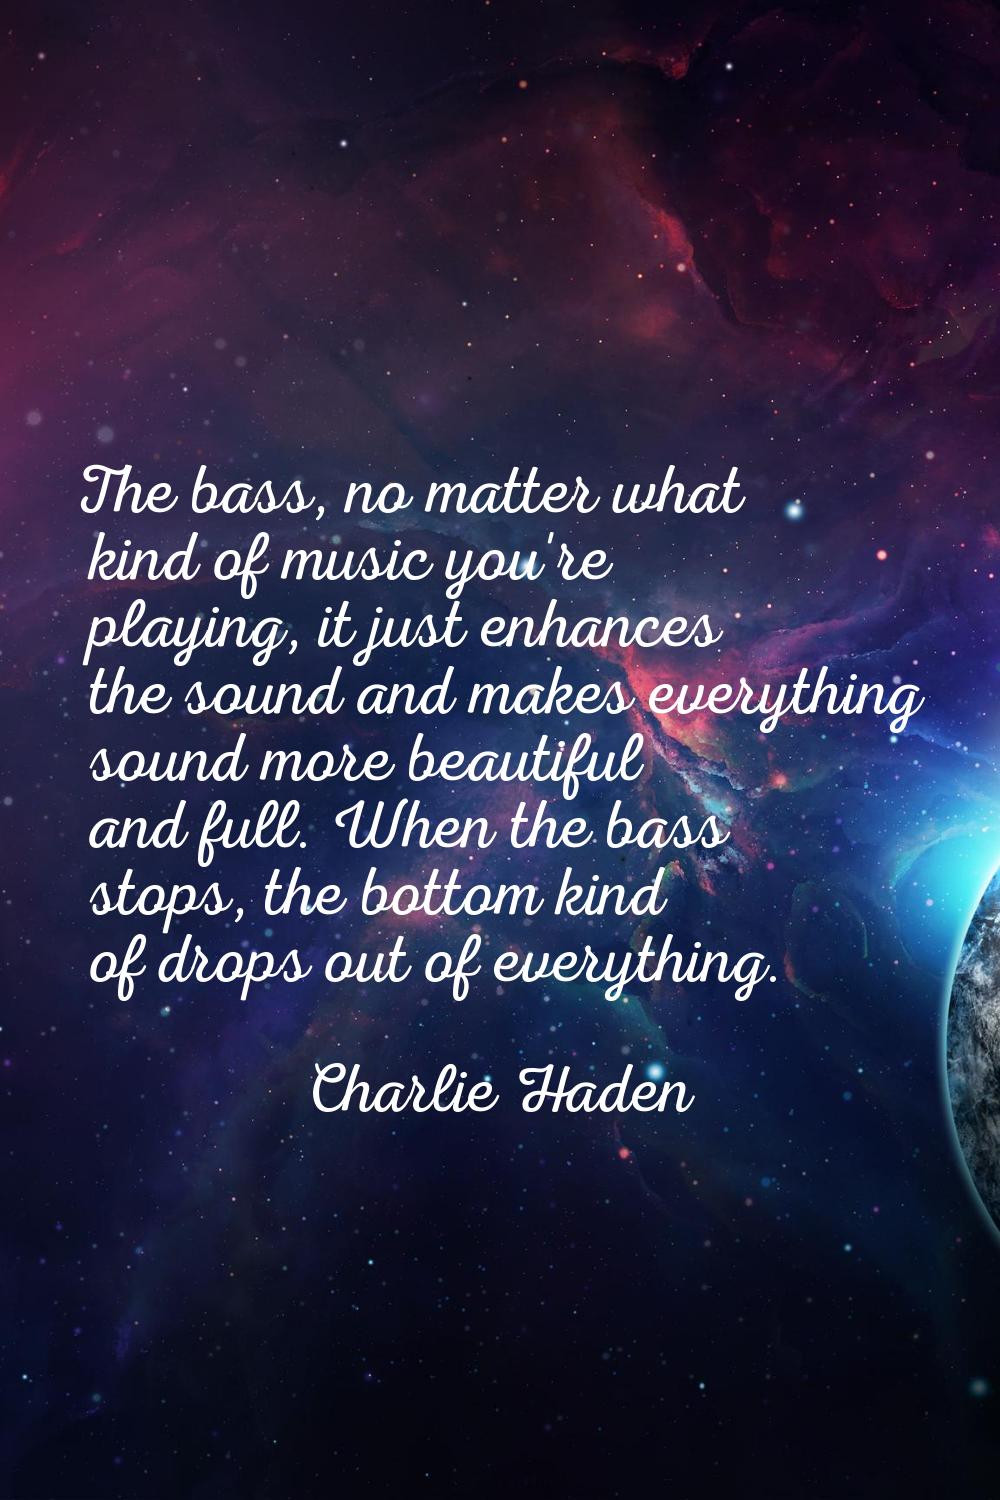 The bass, no matter what kind of music you're playing, it just enhances the sound and makes everyth